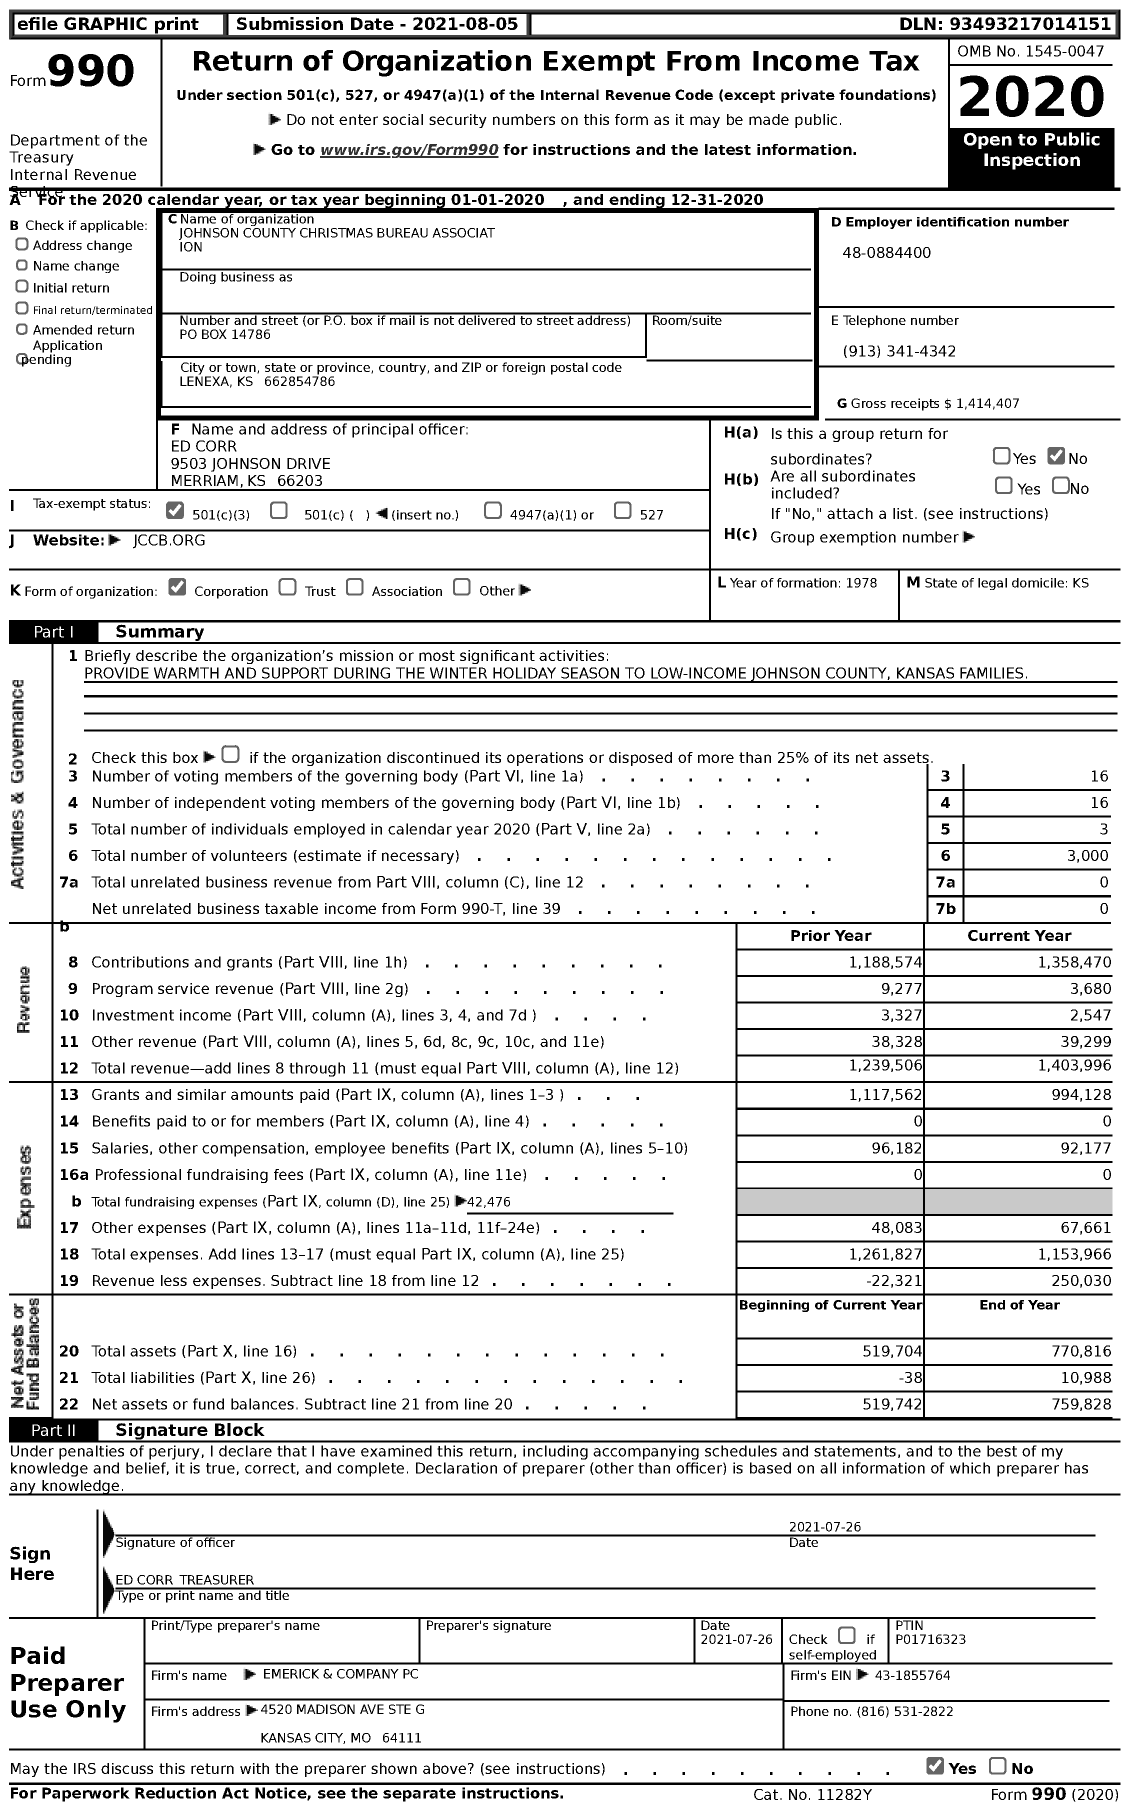 Image of first page of 2020 Form 990 for Johnson County Christmas Bureau Associat Ion